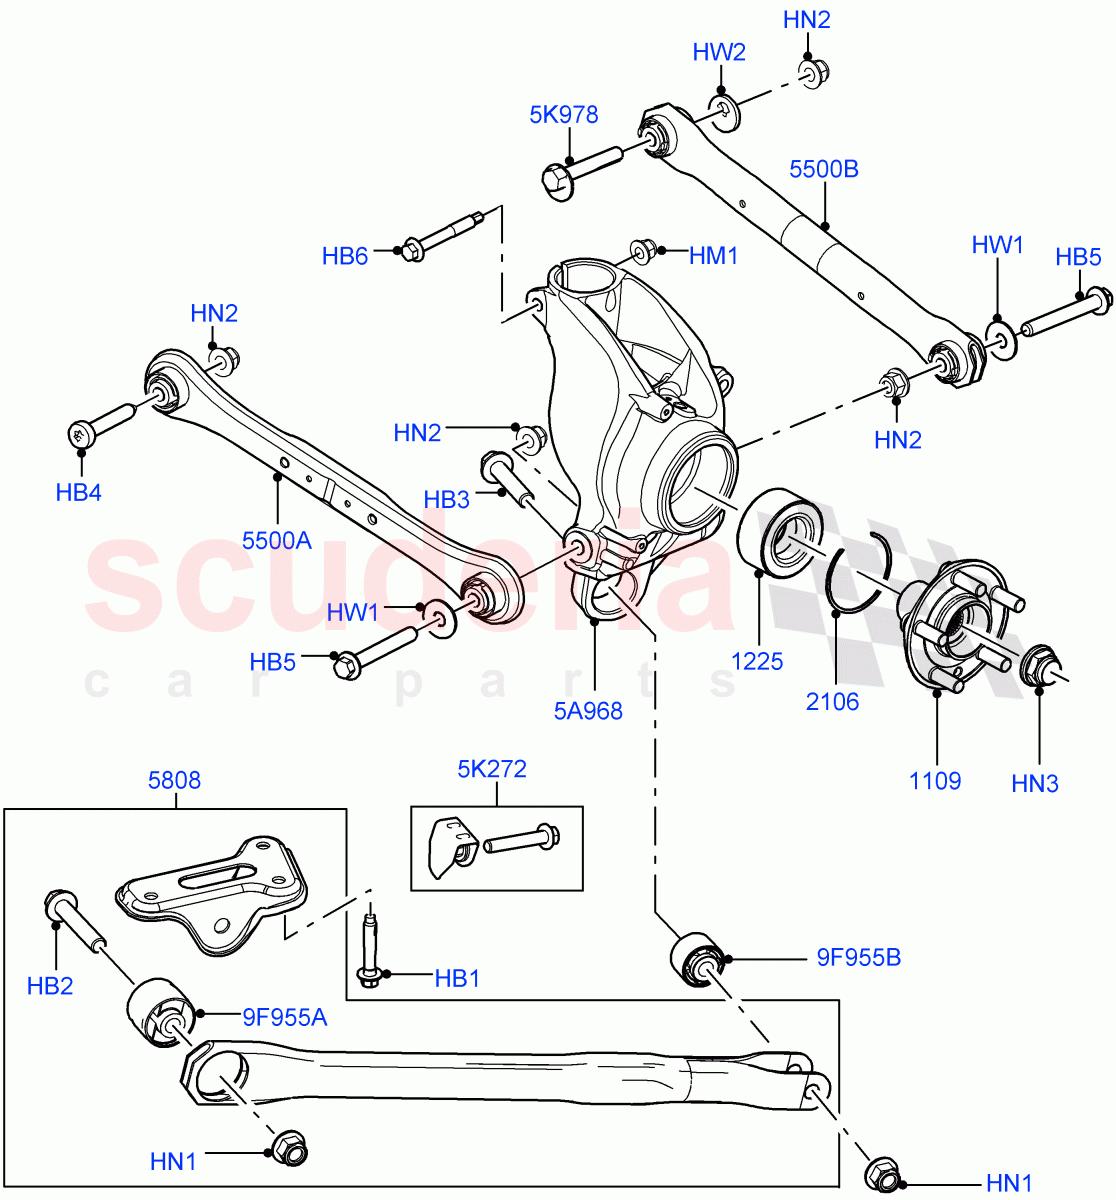 Rear Knuckle And Suspension Arms(Changsu (China))((V)FROMEG000001) of Land Rover Land Rover Range Rover Evoque (2012-2018) [2.2 Single Turbo Diesel]